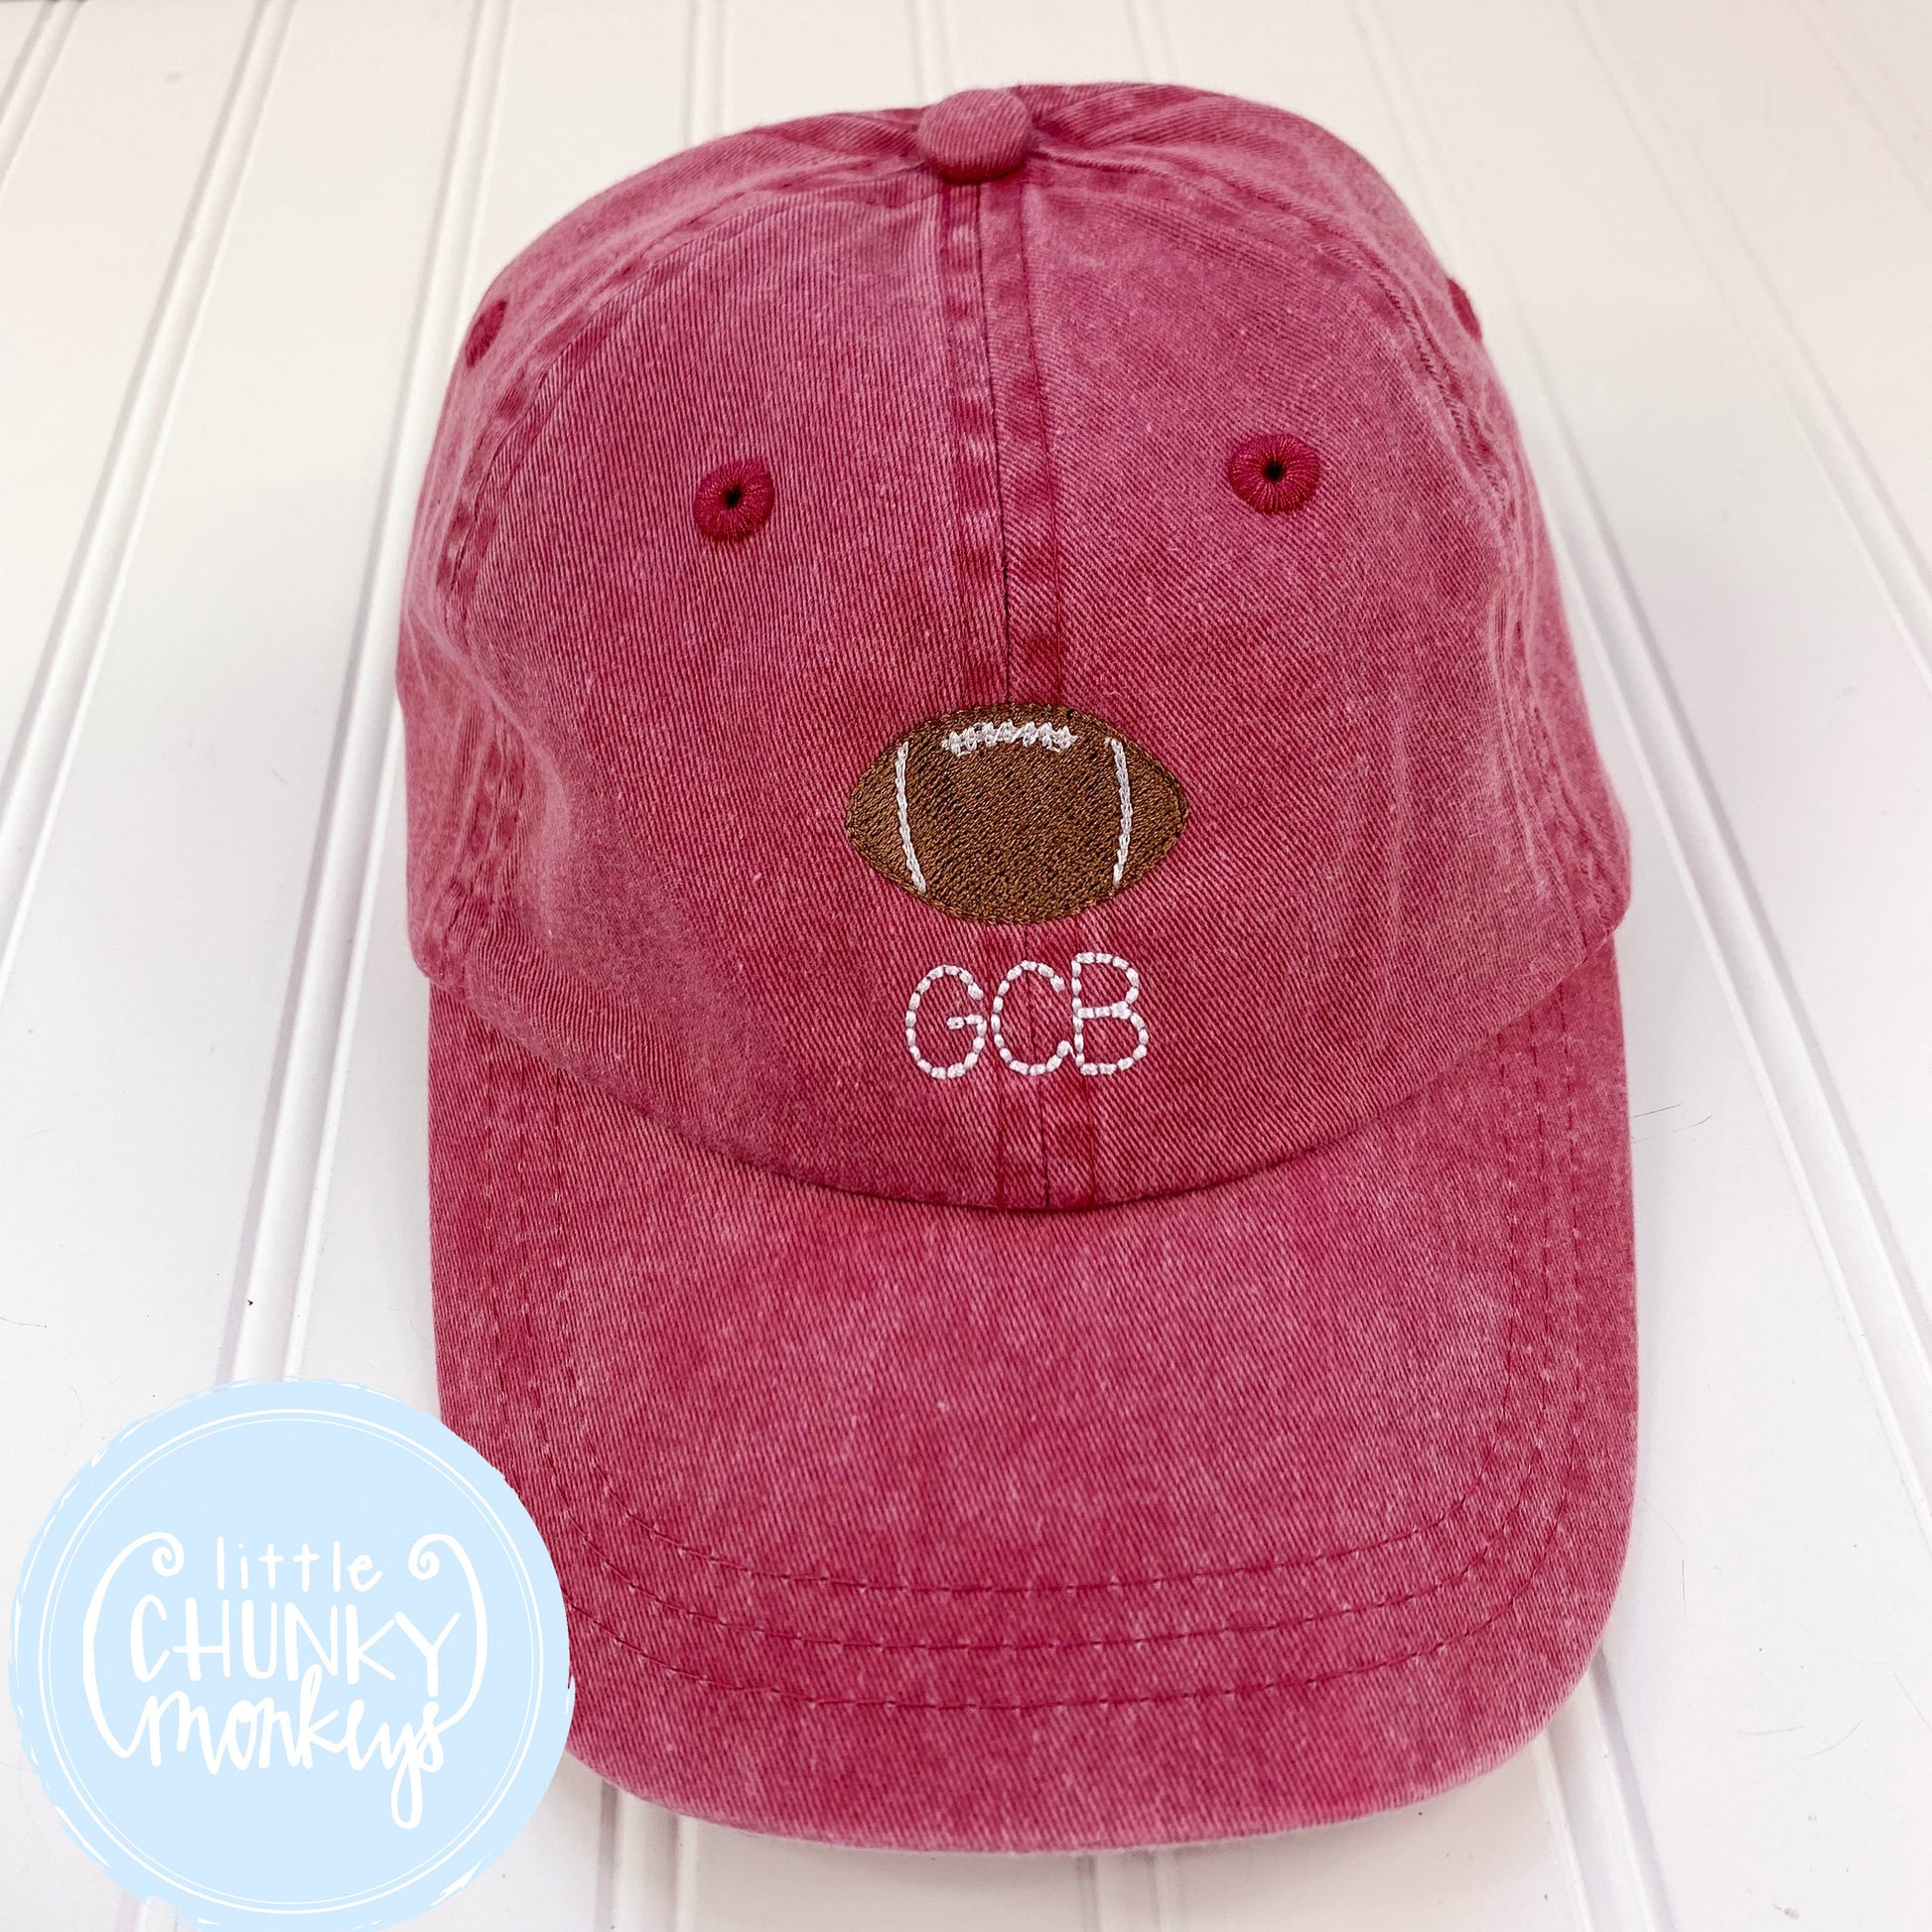 Toddler Kid Hat - Faded Red Hat with Football and Monogram